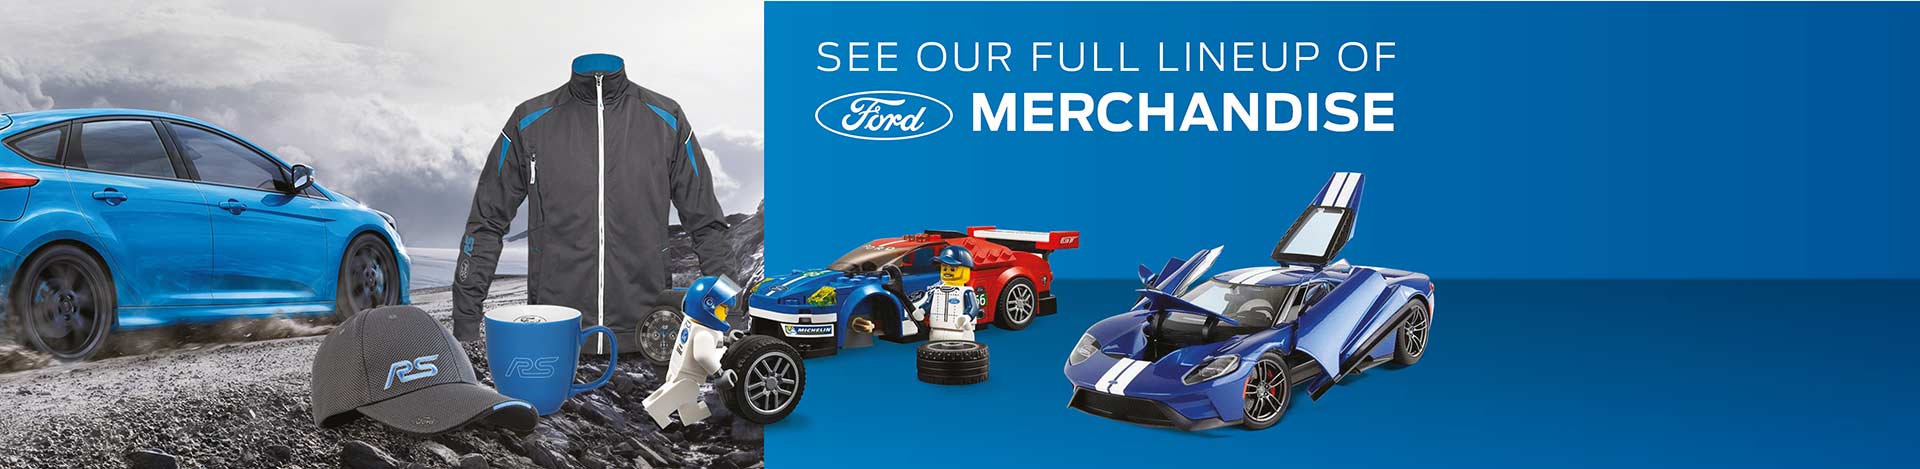 Ford Merchandise Shop Banners